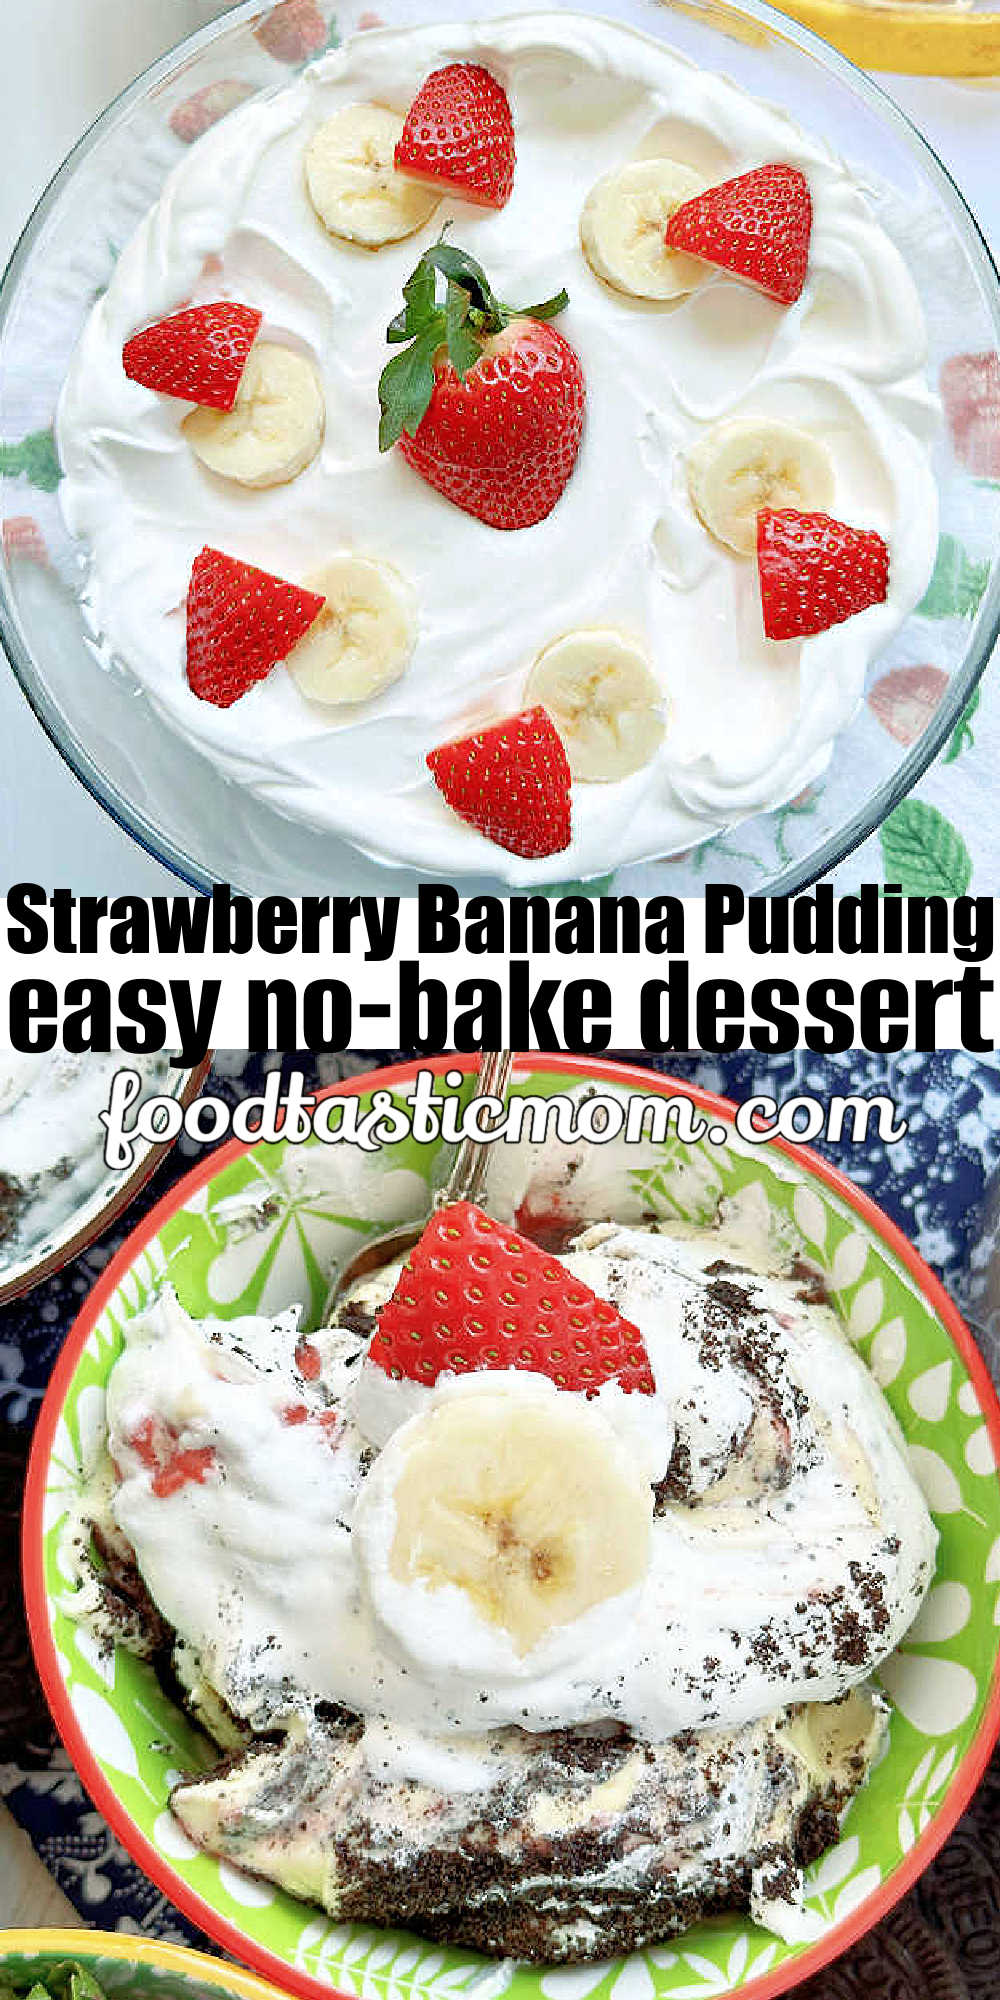 pin 2 for pinterest for strawberry banana pudding via @foodtasticmom